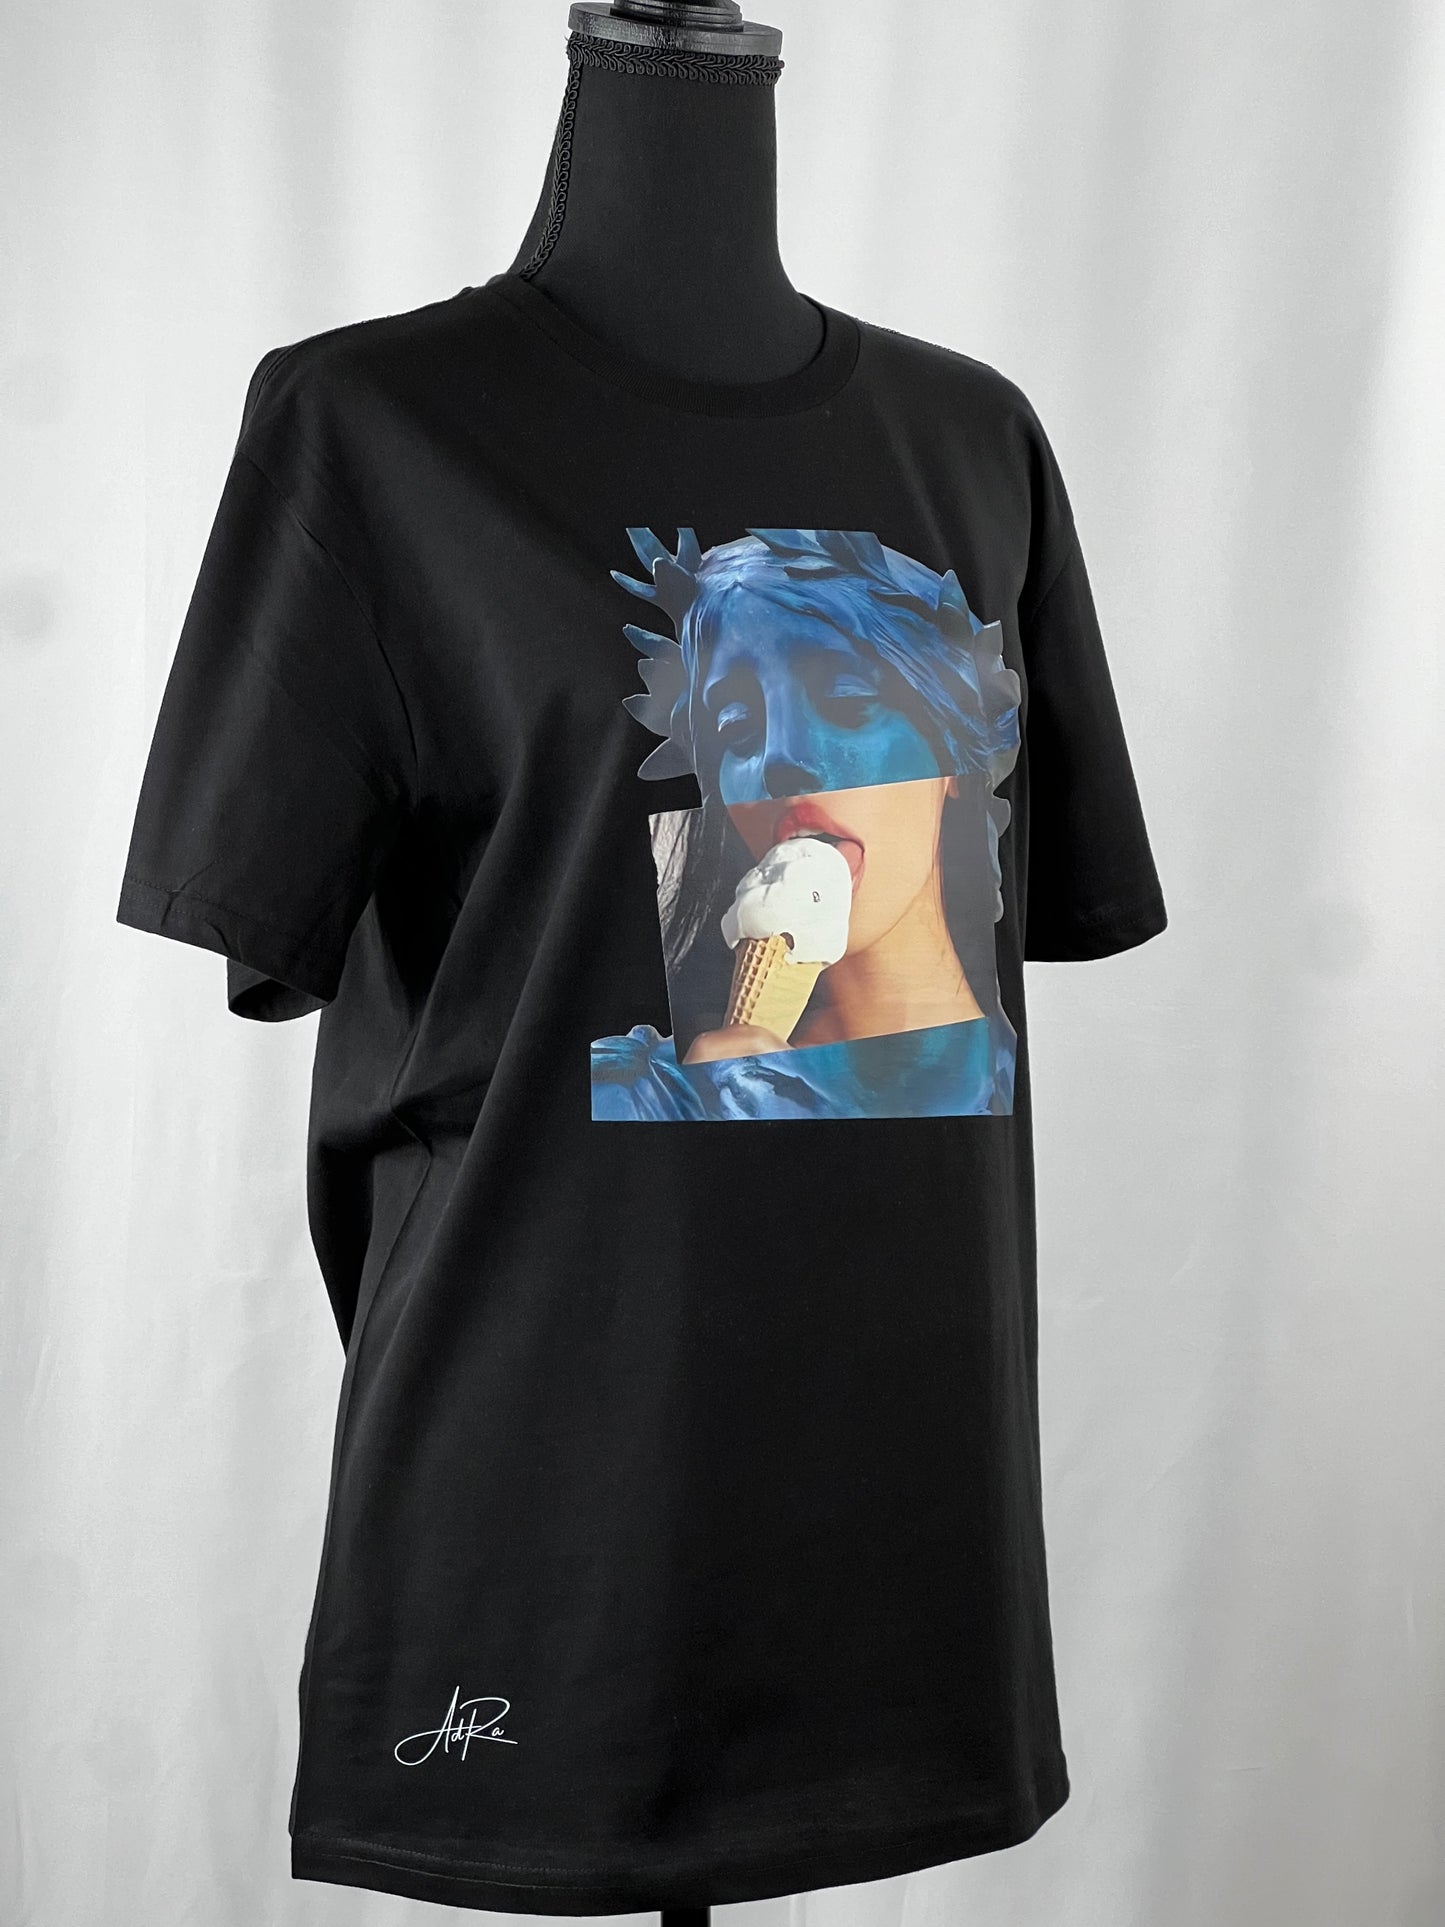 Feel Young and Stylish with Our Exclusive Women's Ice Cream Licking Sexy Design T-Shirt | Adra Apparel